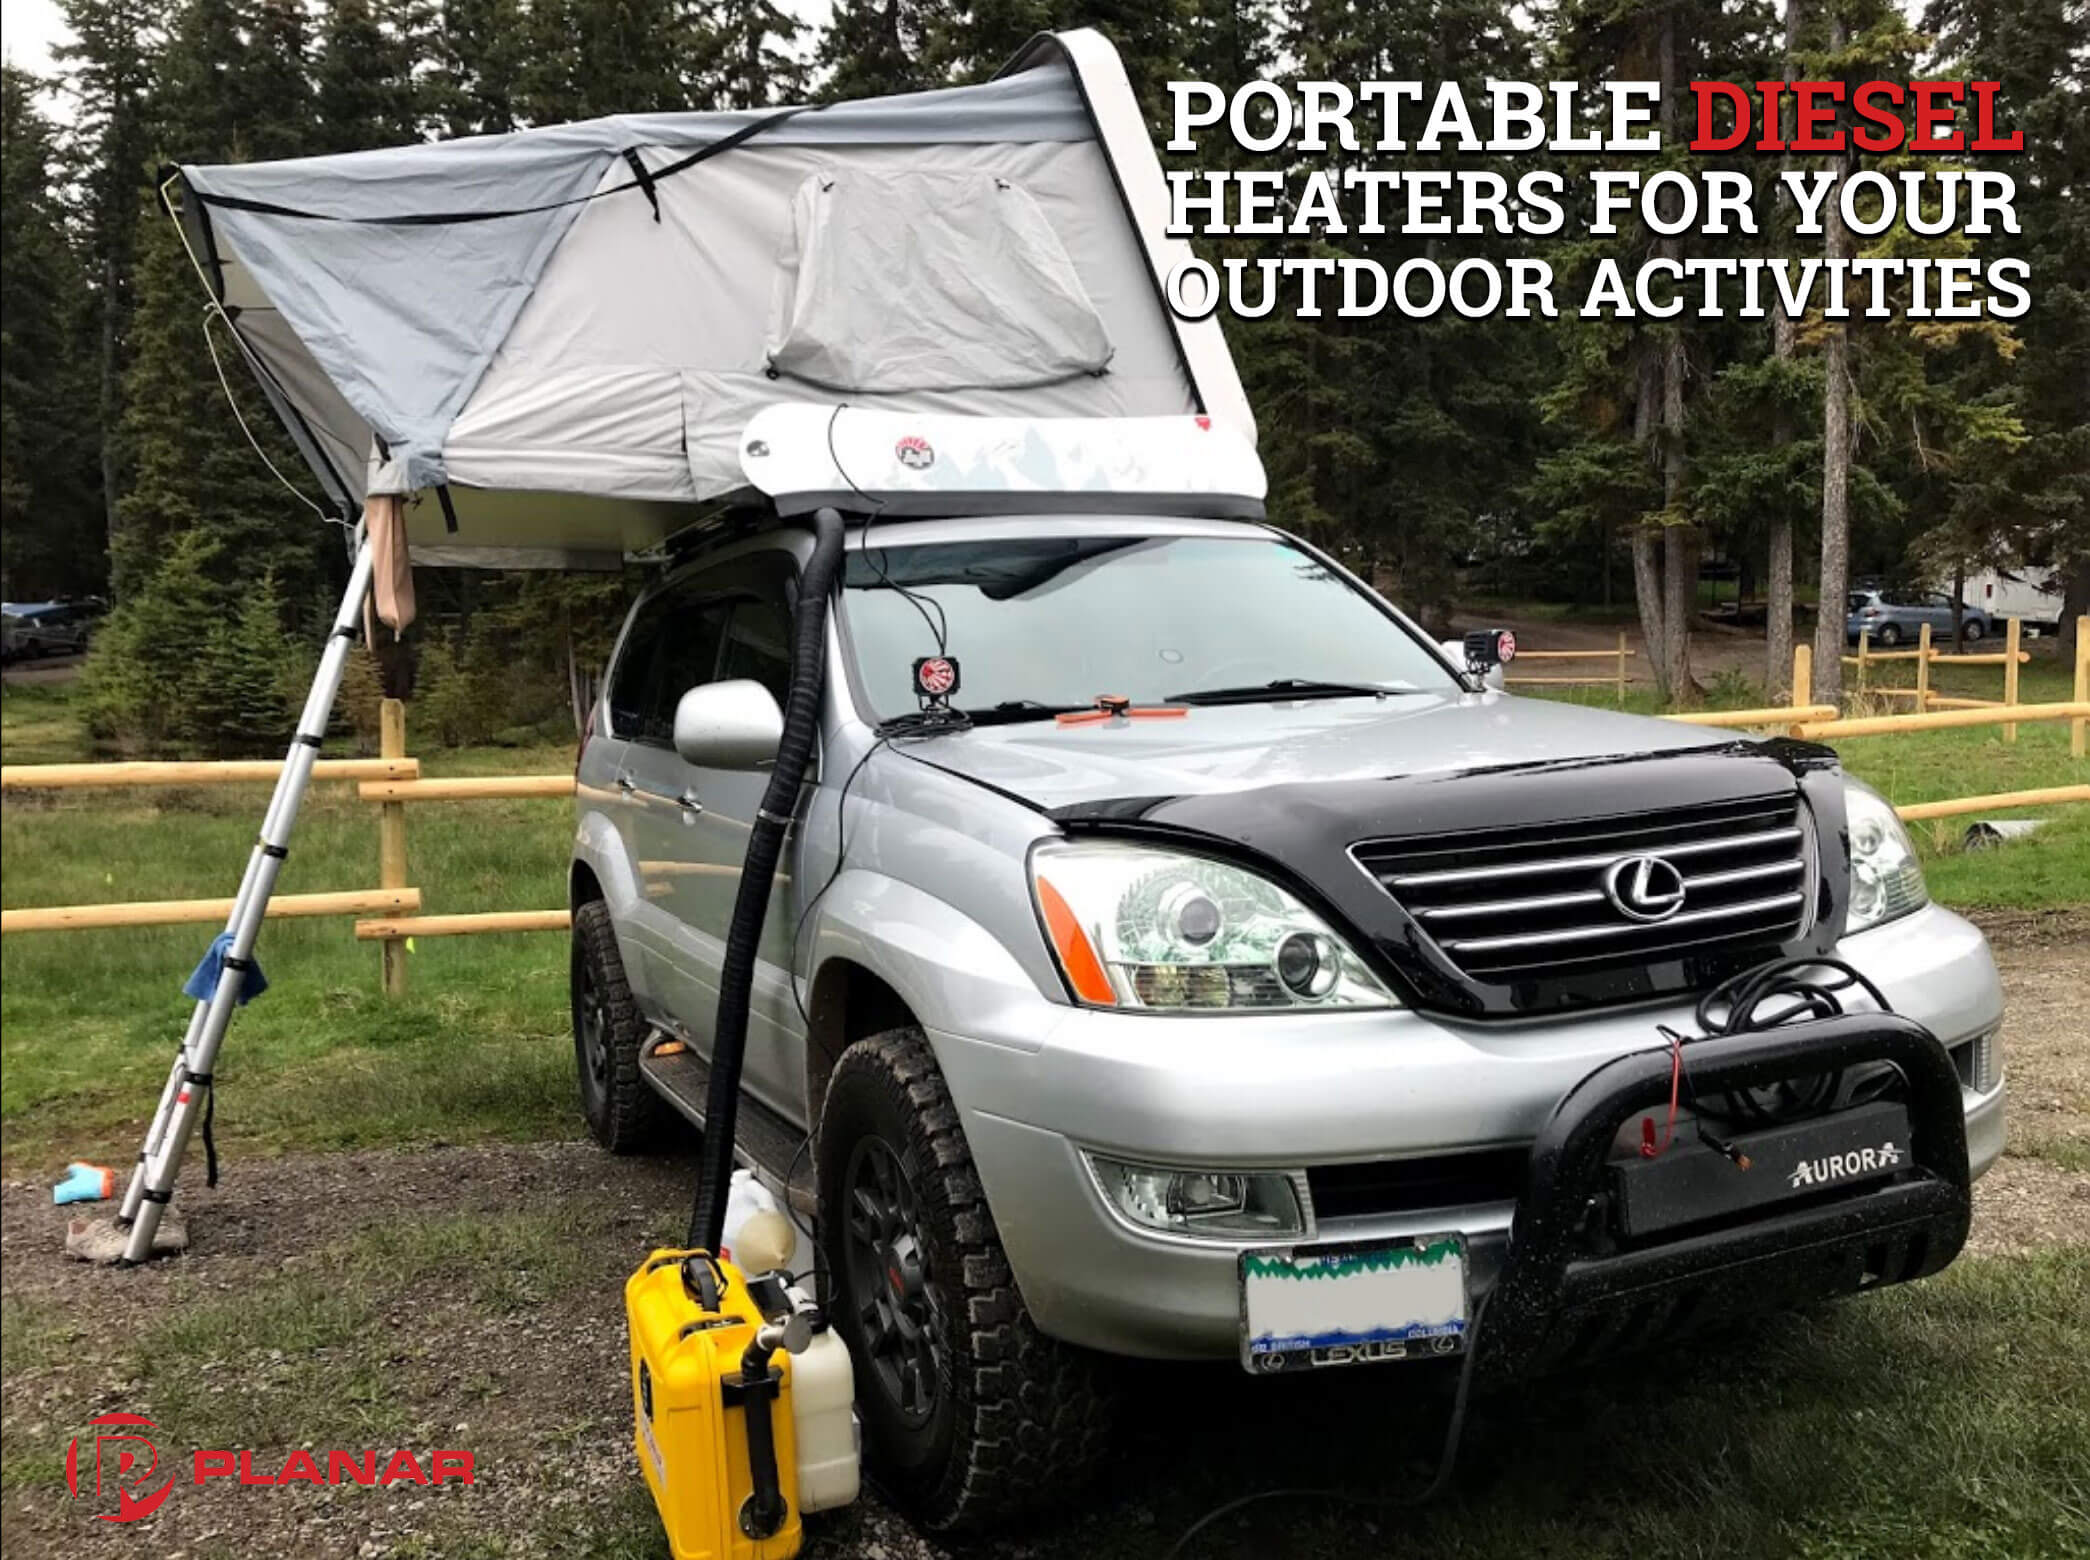 Portable Diesel Heaters Installed For Outdoor Activity | Diesel Heaters For Camping | Planar Diesel Heaters